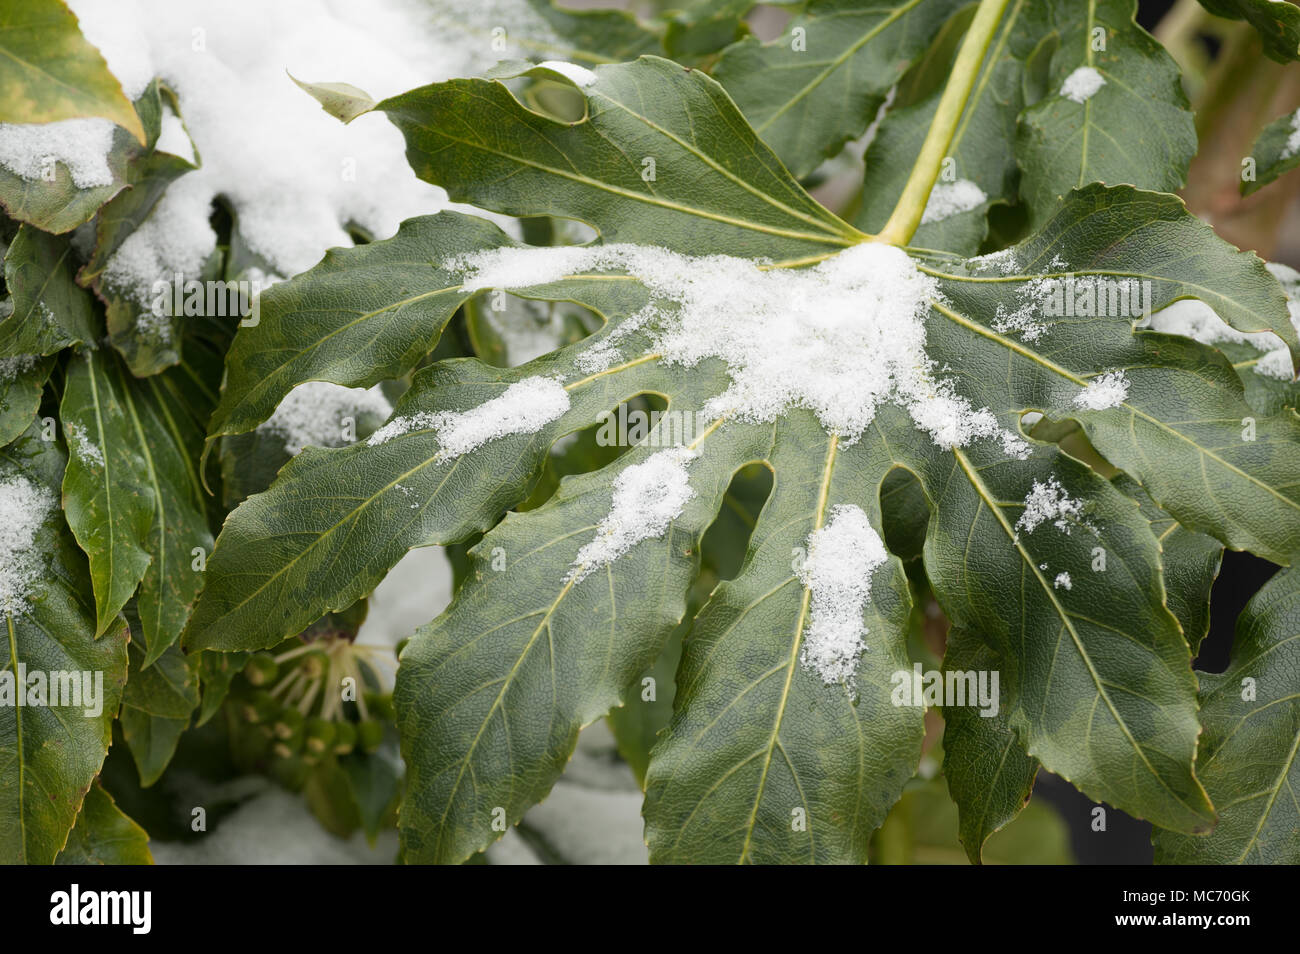 Thick waxy coating on dark green leaves protects Japanese aralia against coating of snow Stock Photo